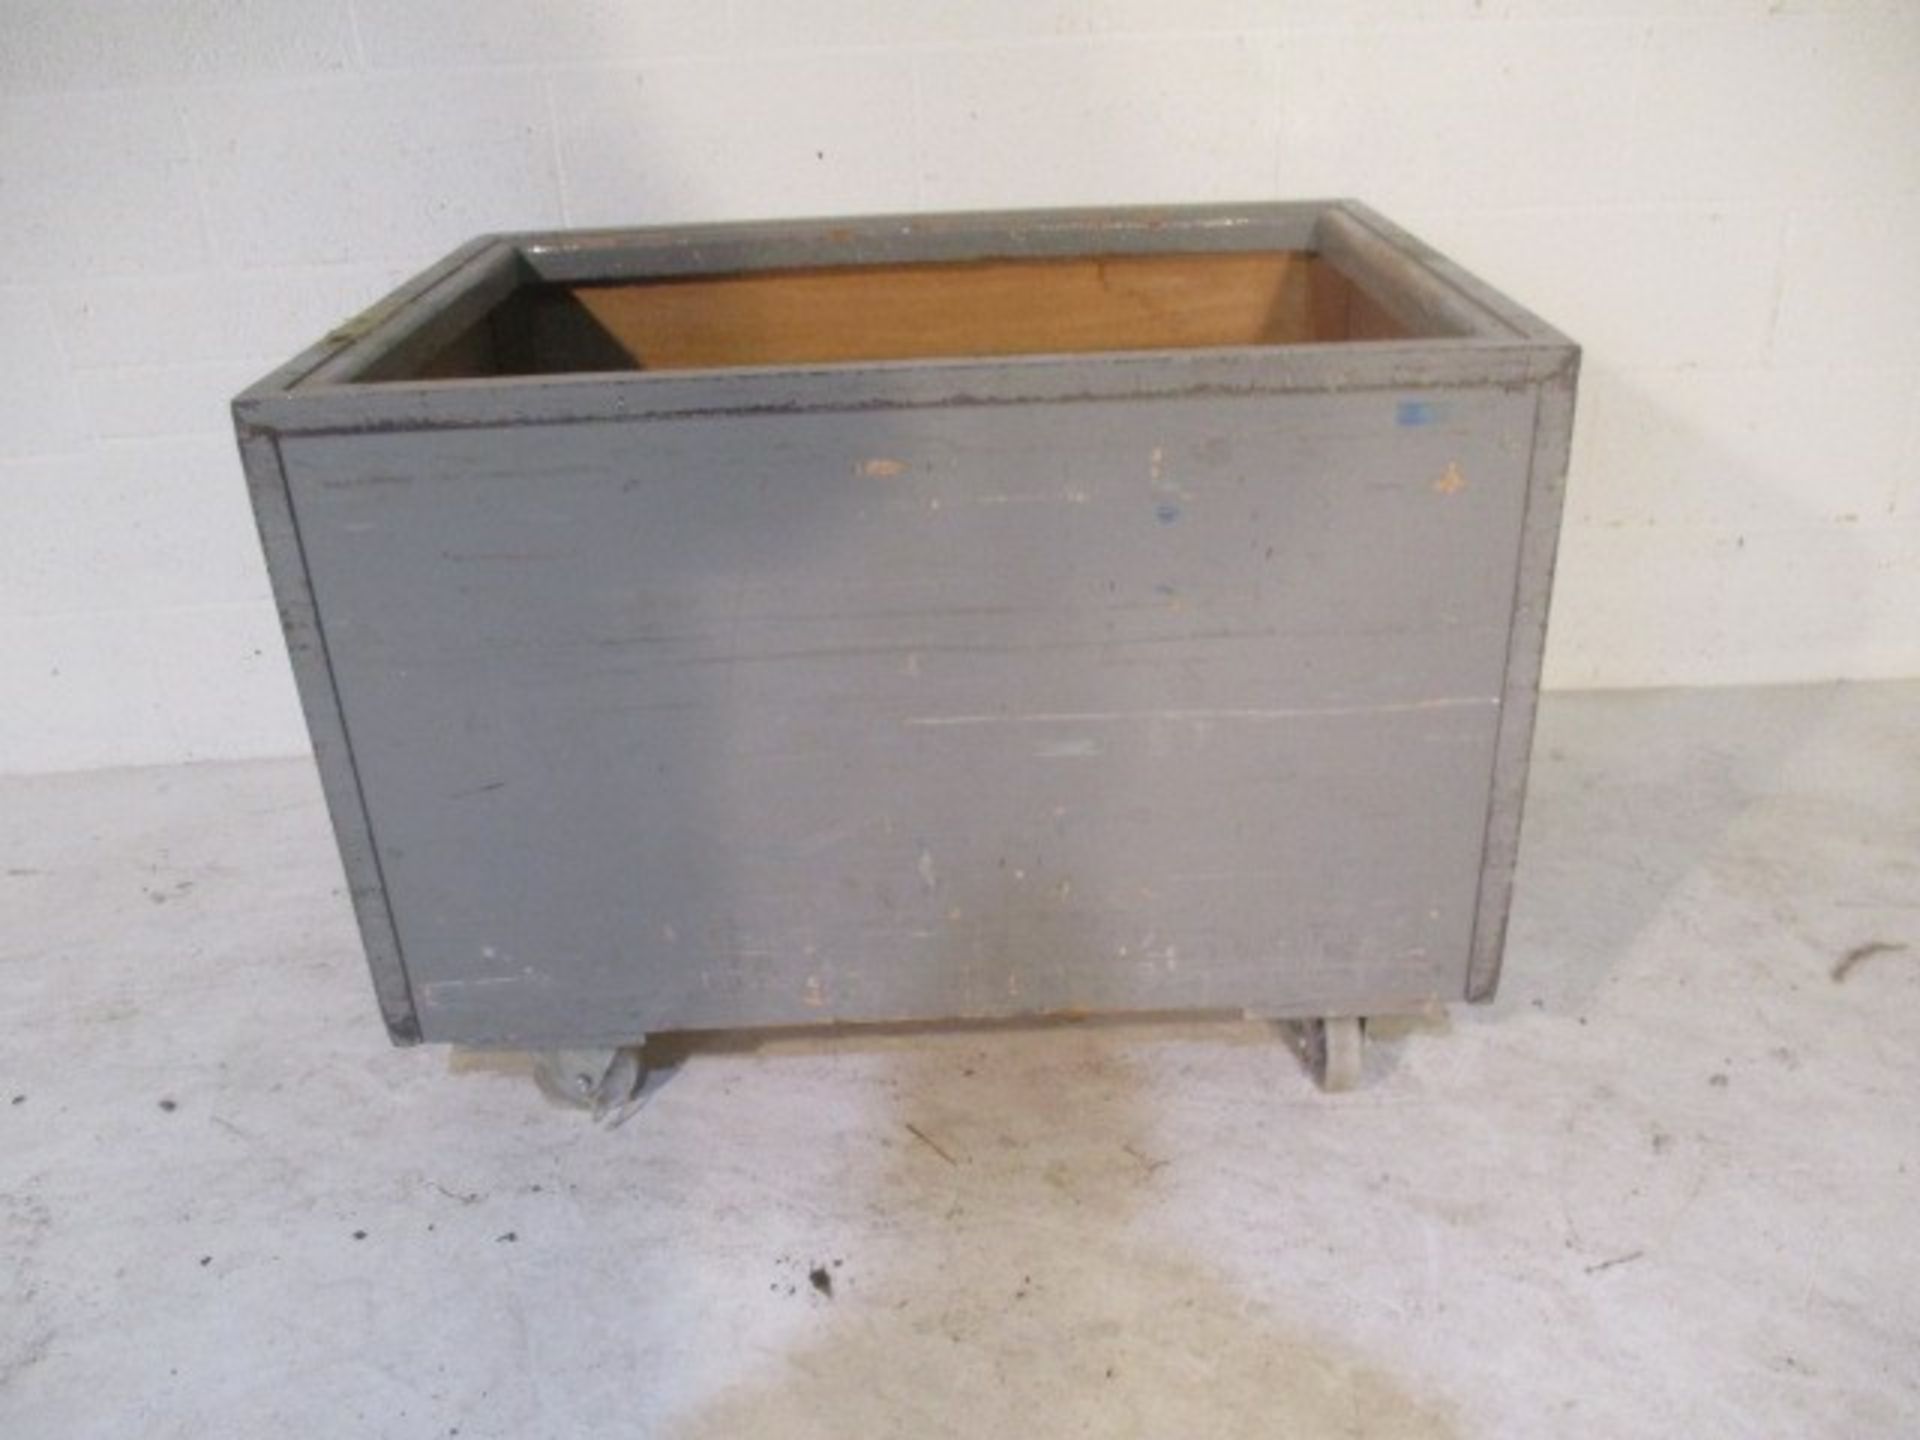 An grey painted industrial trolley with metal edging - length 102cm, width 72cm